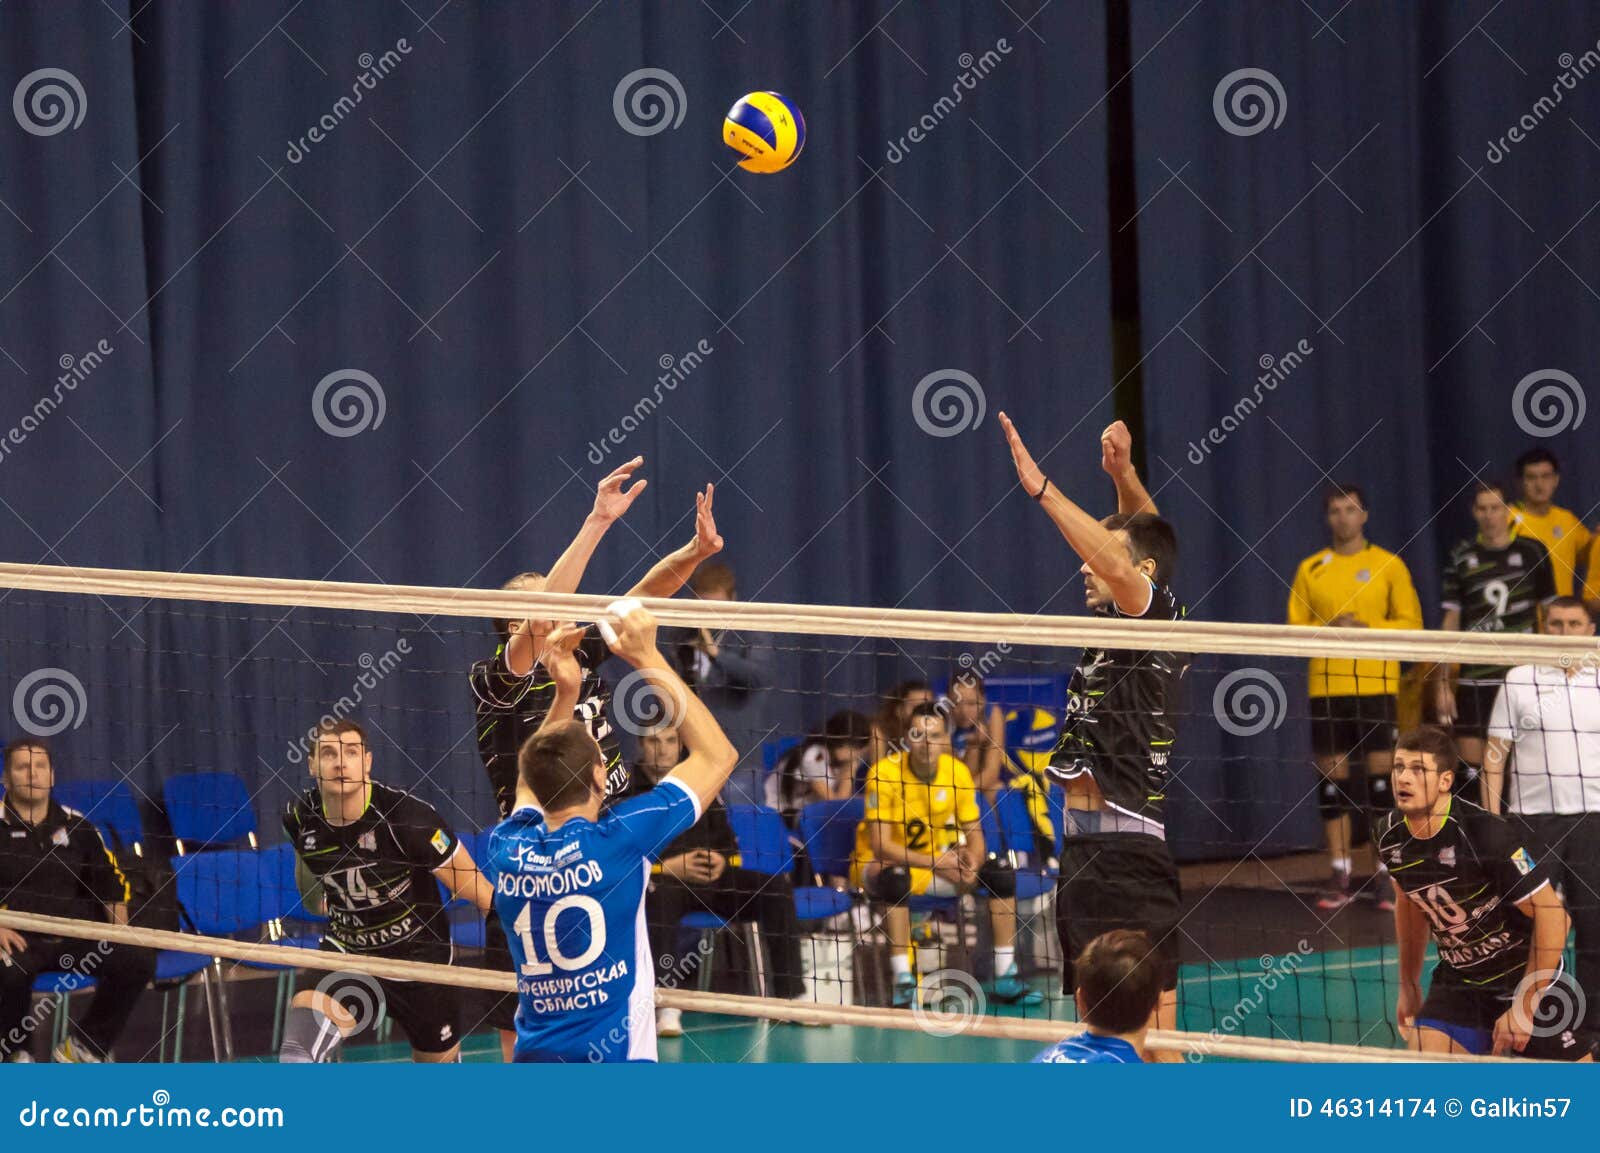 The game of volleyball, editorial stock image. Image of tournament ...